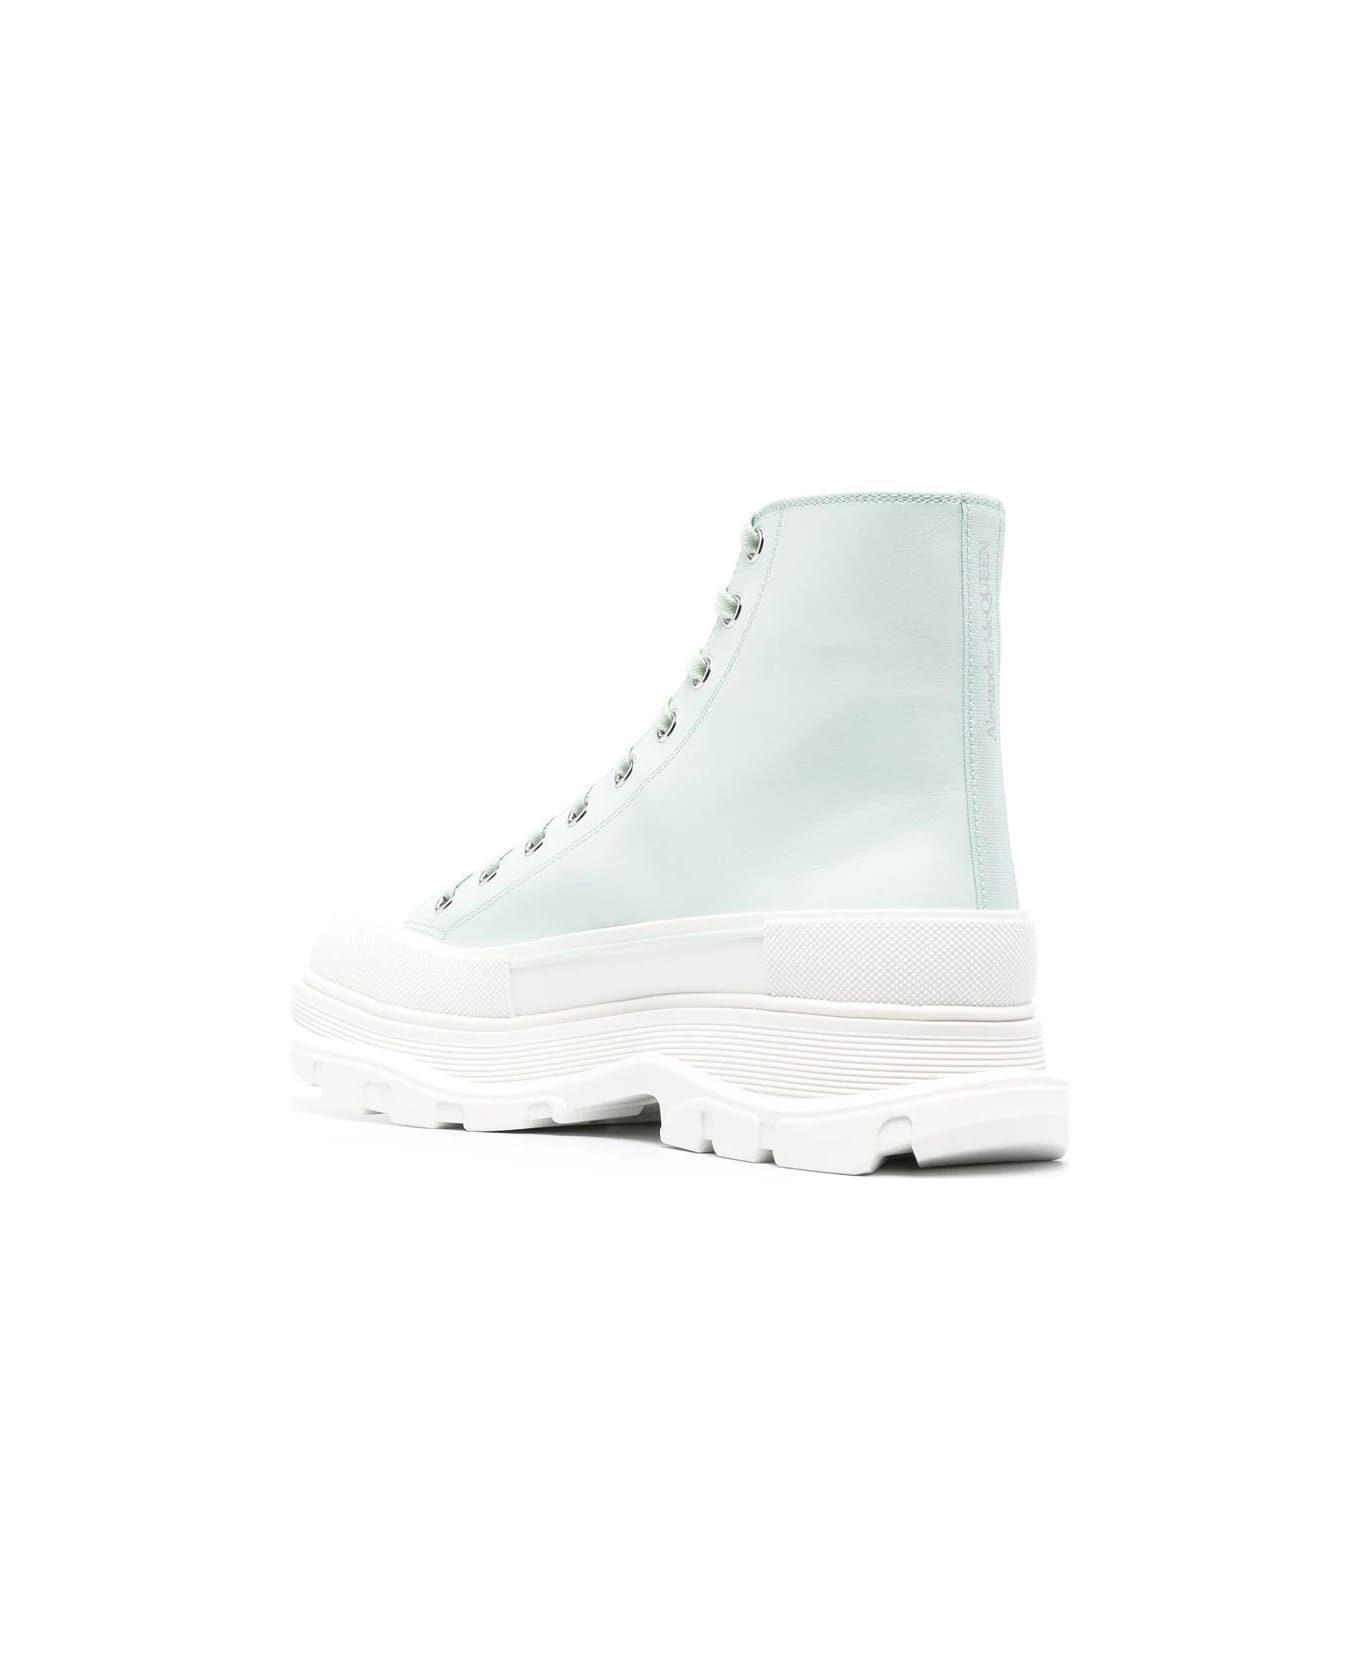 Alexander McQueen White Tread Slick Boots With Mint Green Shade - Bianco スニーカー